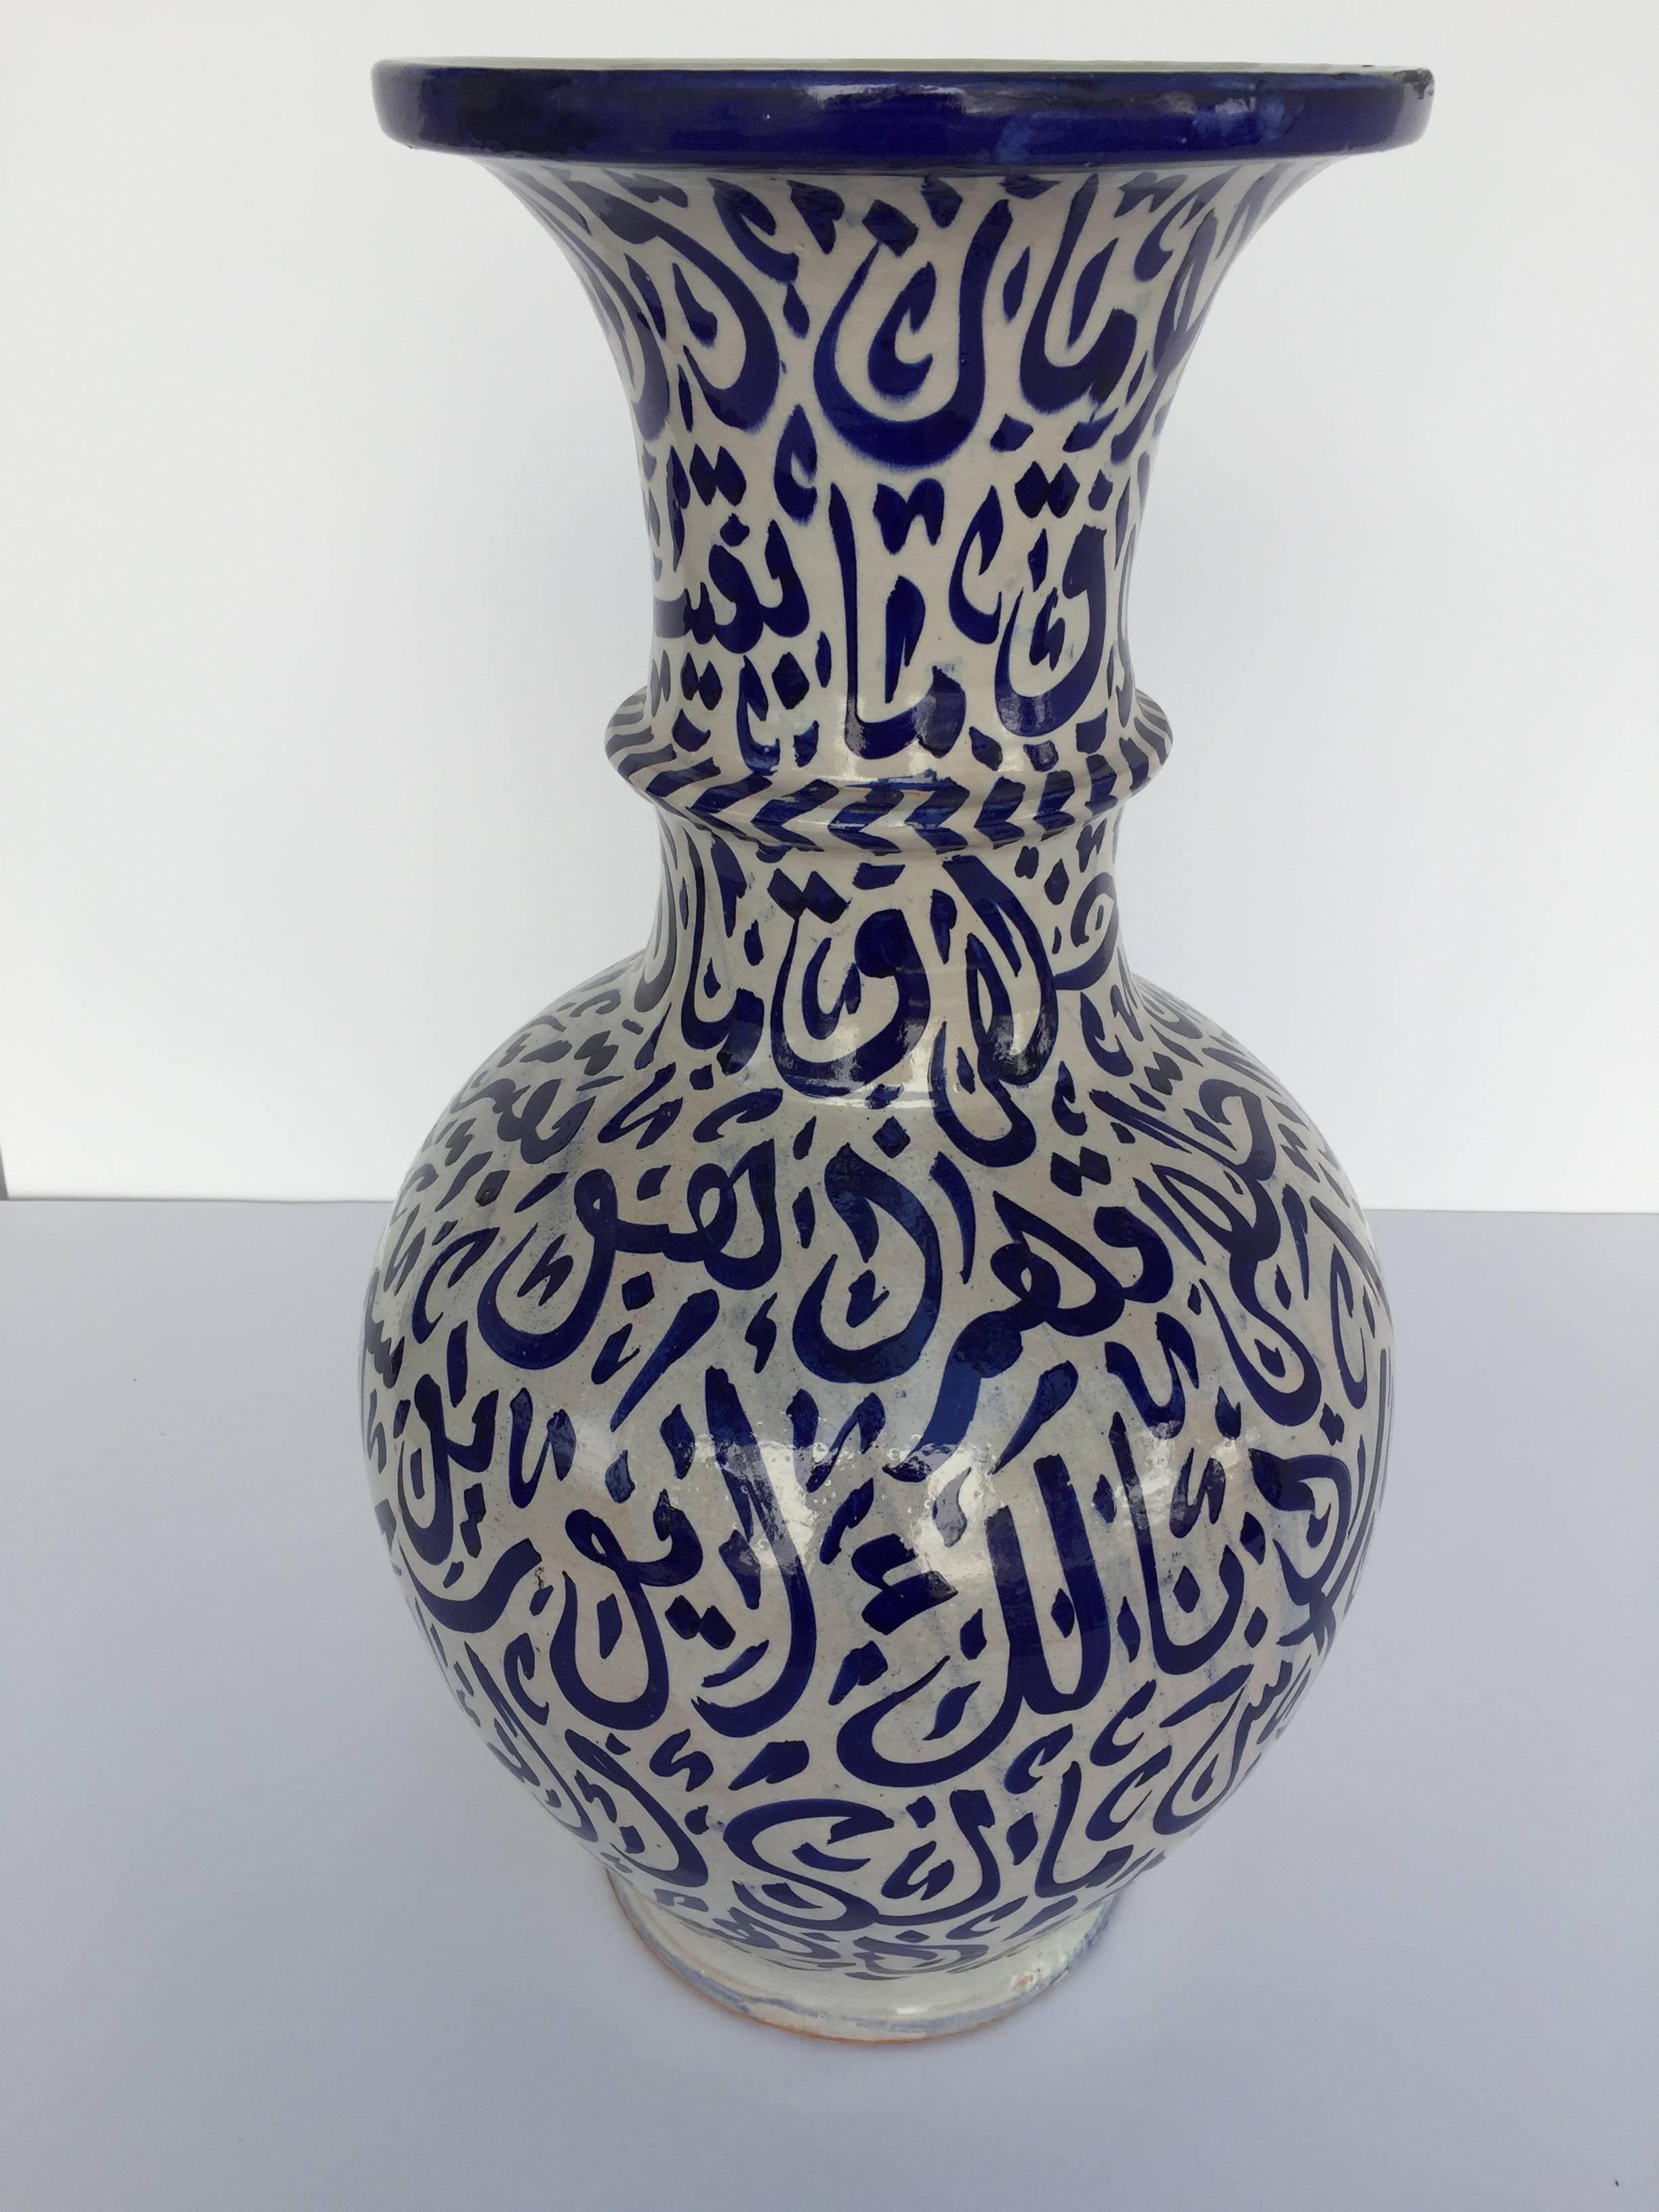 Large Moroccan glazed ceramic vase from Fez.
Moorish style ceramic handcrafted and hand-painted with Arabic calligraphy writing.
This kind of Art Writing looks calligraphic is called Lettrism, it is a form of art that uses letters that are not